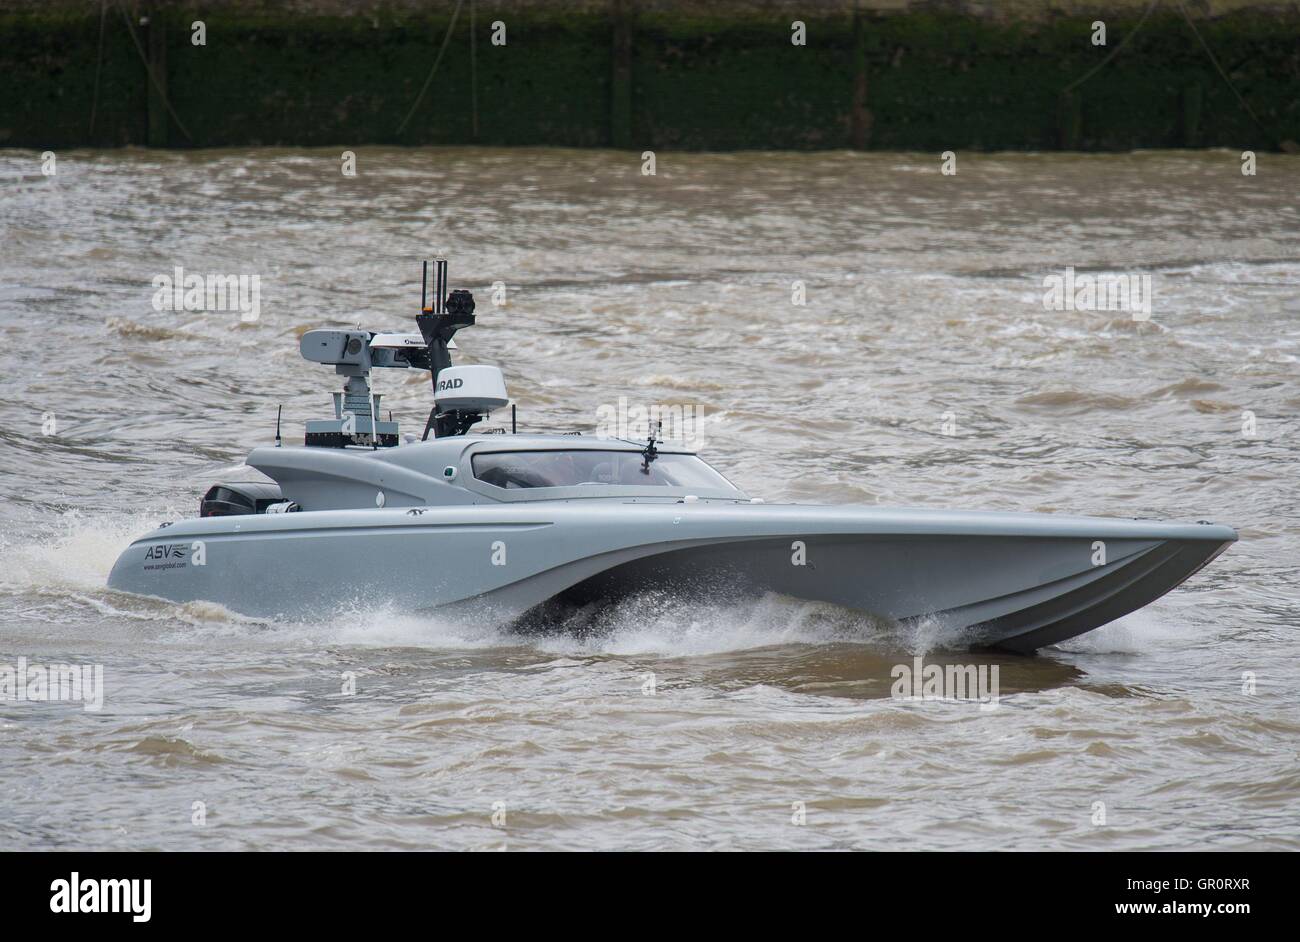 The Maritime Autonomy Surface Testbed (MAST), an unmanned surface vessel (USV) is tested on the River Thames, London, as part of preparations for the Royal Navy's 'Unmanned Warrior' test program this autumn. Stock Photo